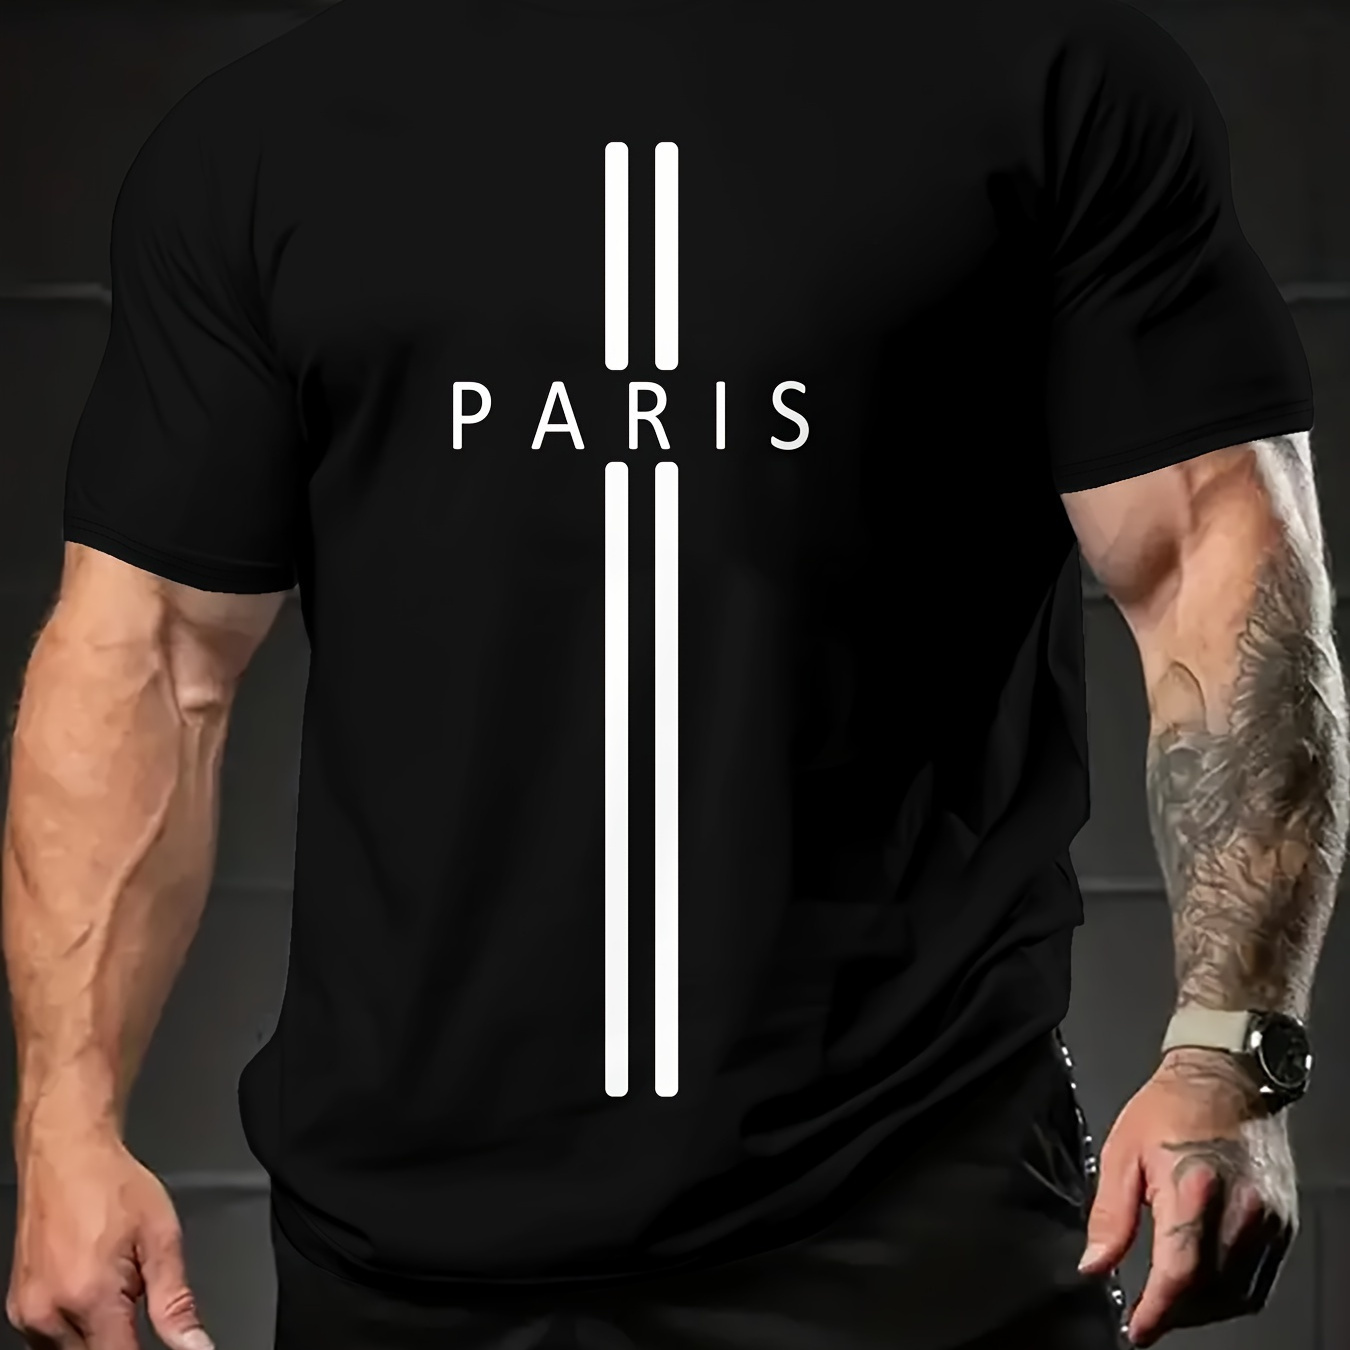 

Paris Alphabet Print Crew Neck Short Sleeve T-shirt For Men, Casual Summer T-shirt For Daily Wear And Vacation Resorts